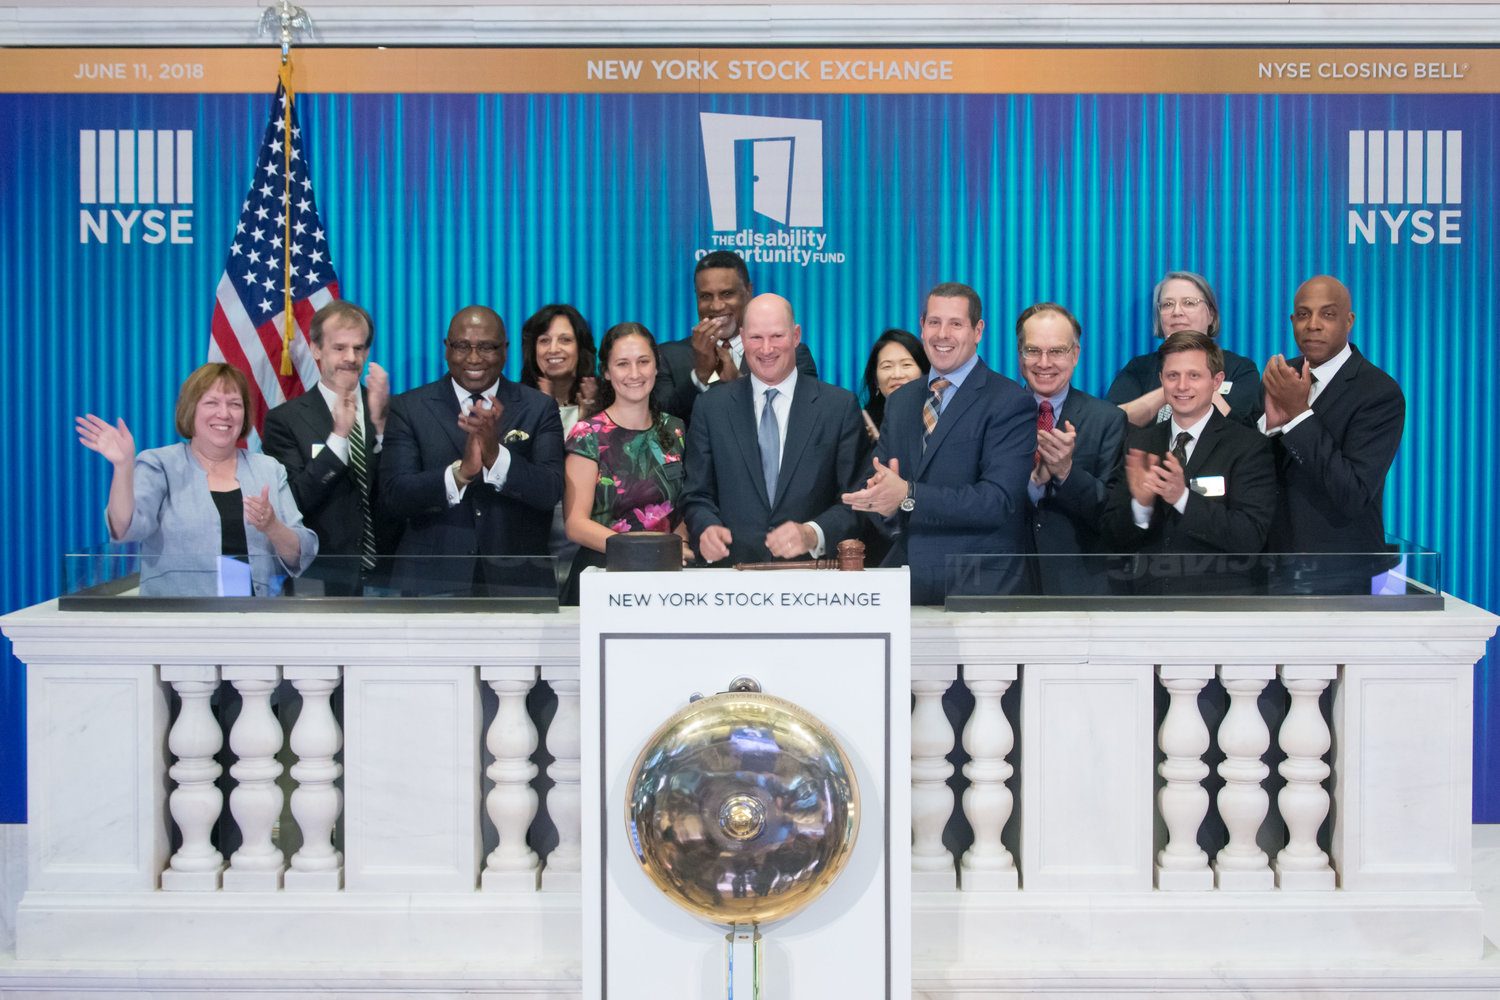 Charles Hammerman, center, president and CEO of Rockville Centre-based Disability Opportunity Fund, rang the closing bell at the New York Stock Exchange on the 10th anniversary of his nonprofit in 2017.